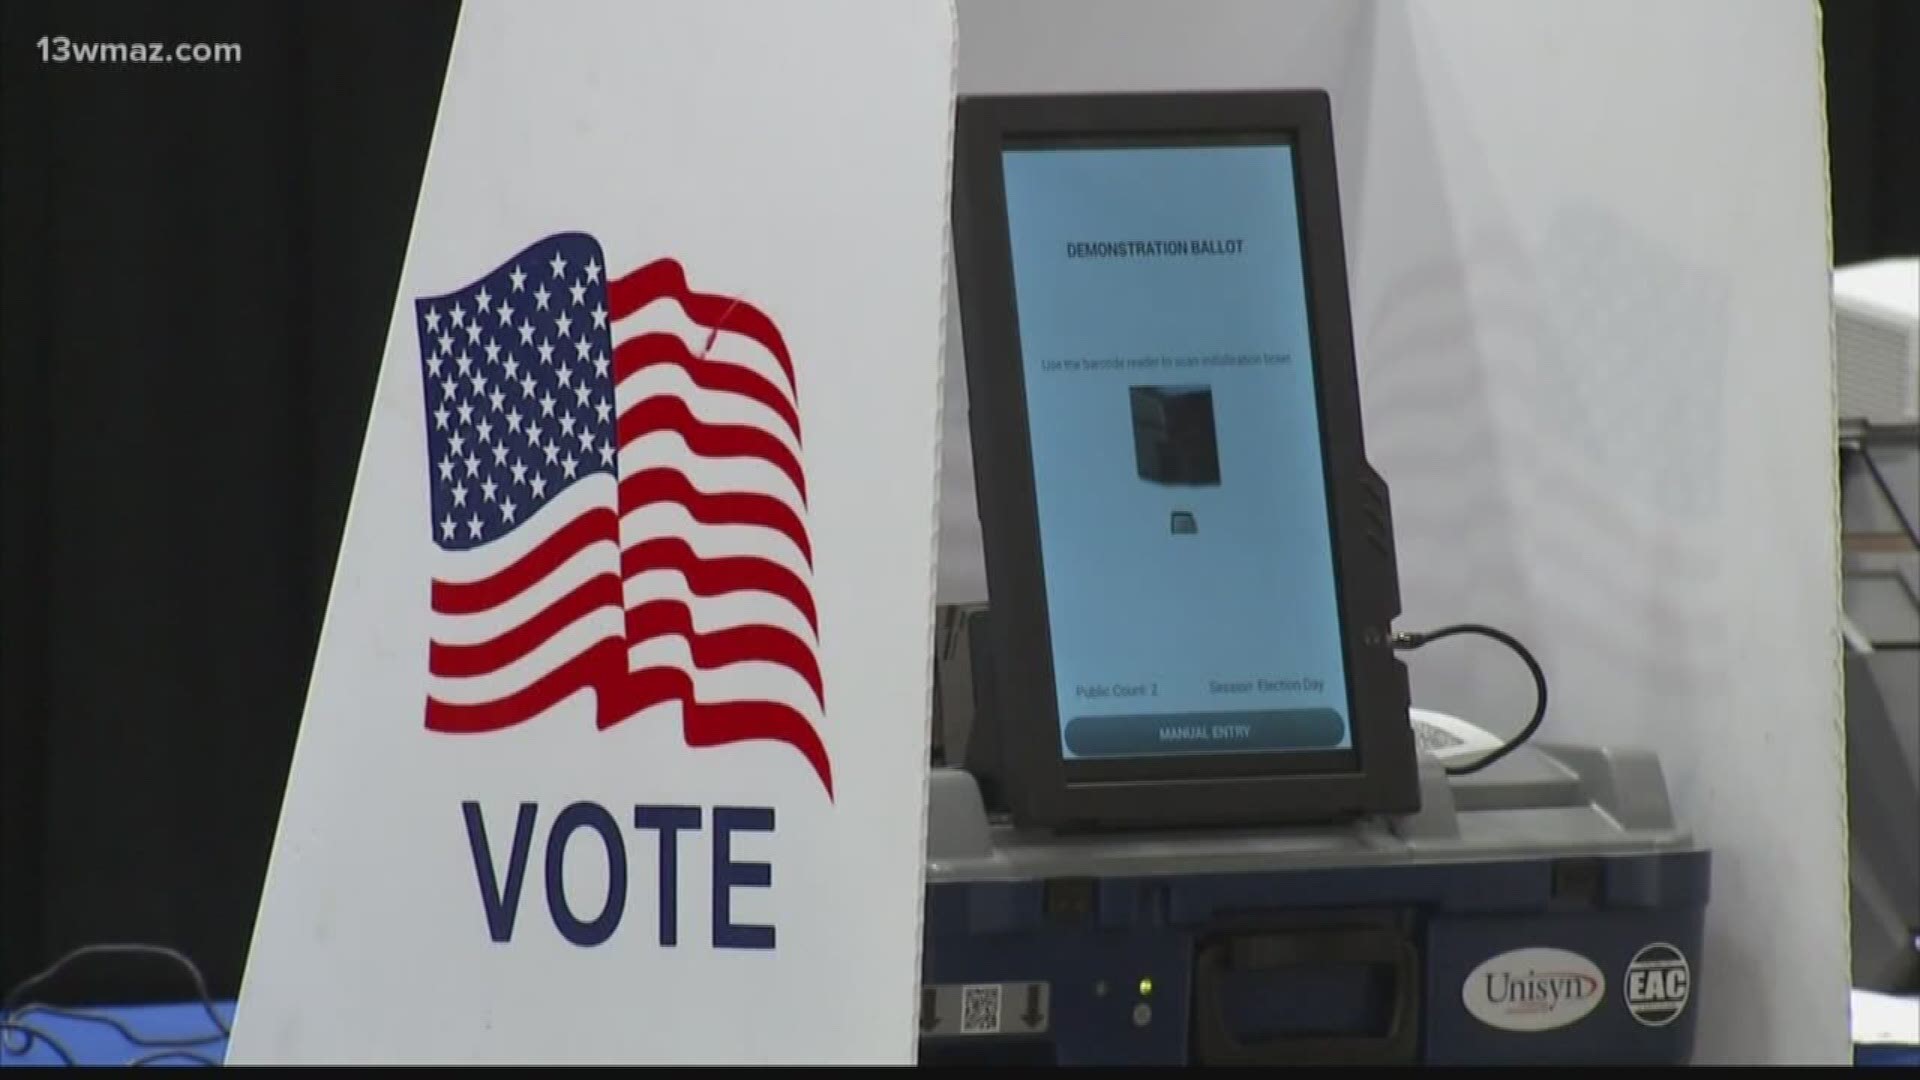 Some Georgia counties are still waiting on their new voting machines. Bibb County got its delivery in January, but Houston County will have to wait until Monday.